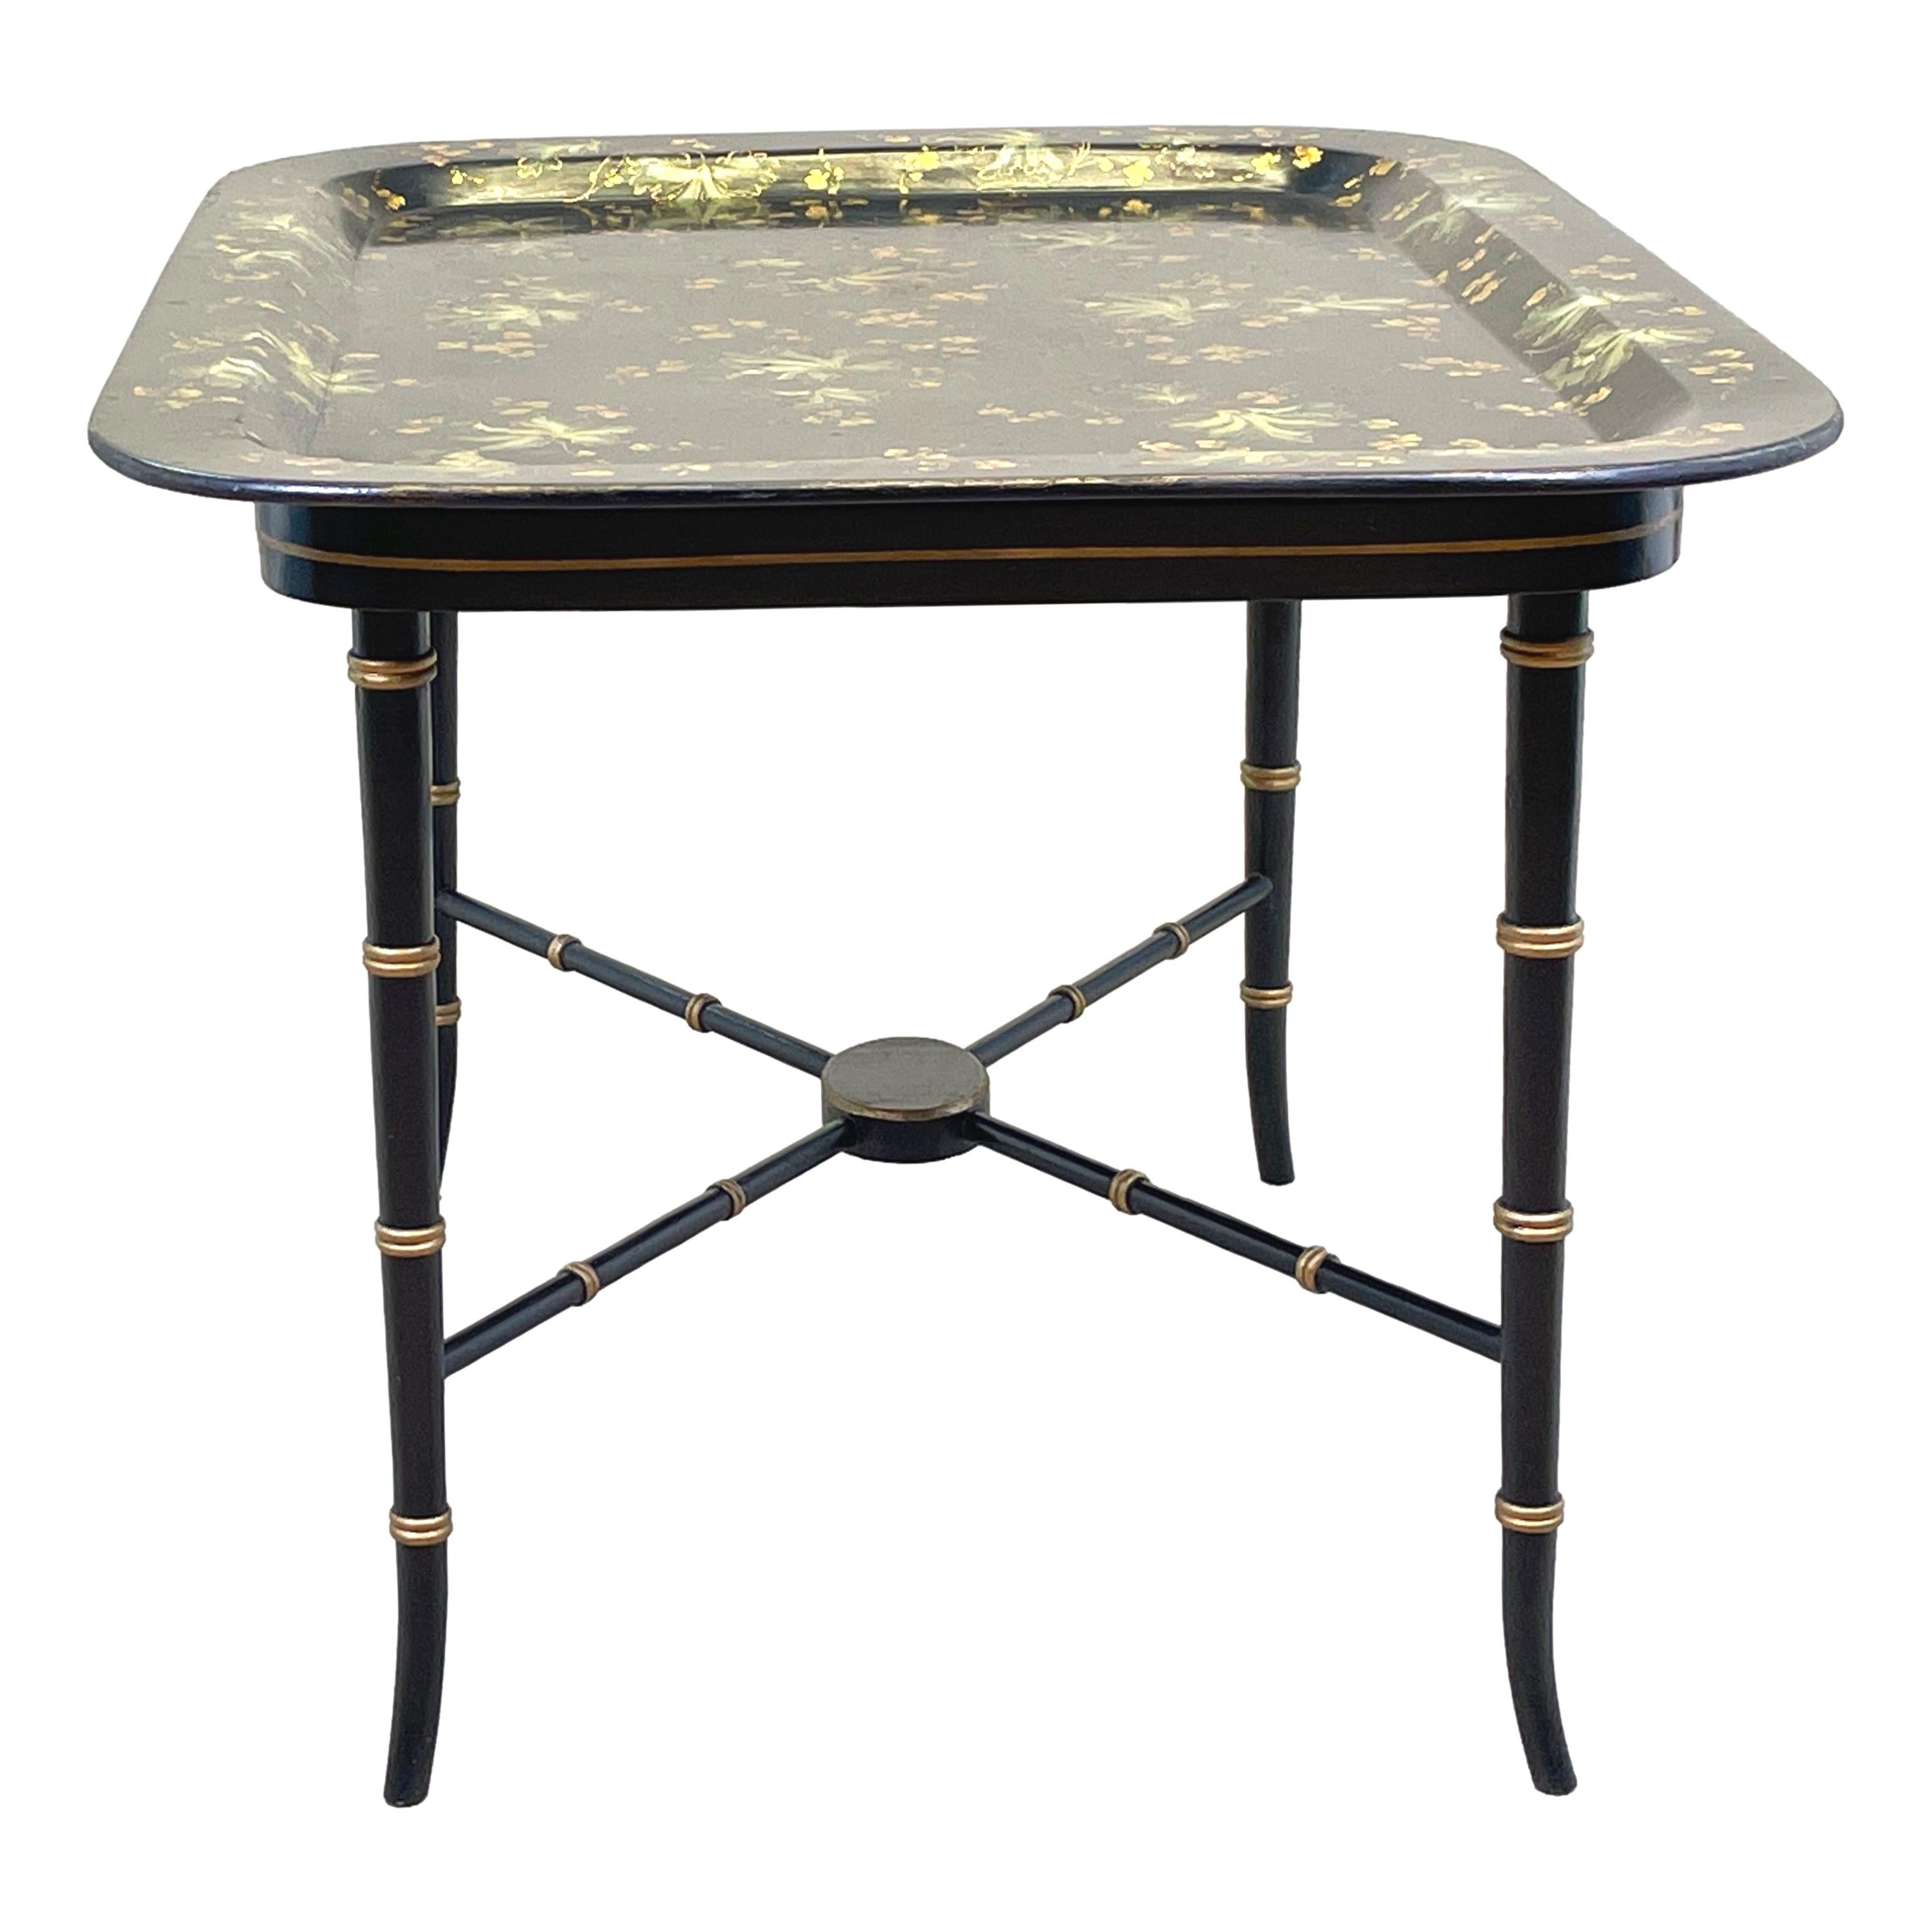 A Fine Quality Late Regency Period 19th Century Papier Mache tray On Stand, Or Coffee Table, Having Elegant Hand Painted And Gilded Decoration, Housed On Attractive Bamboo Effect Stand.


What better way to look after the environment than to